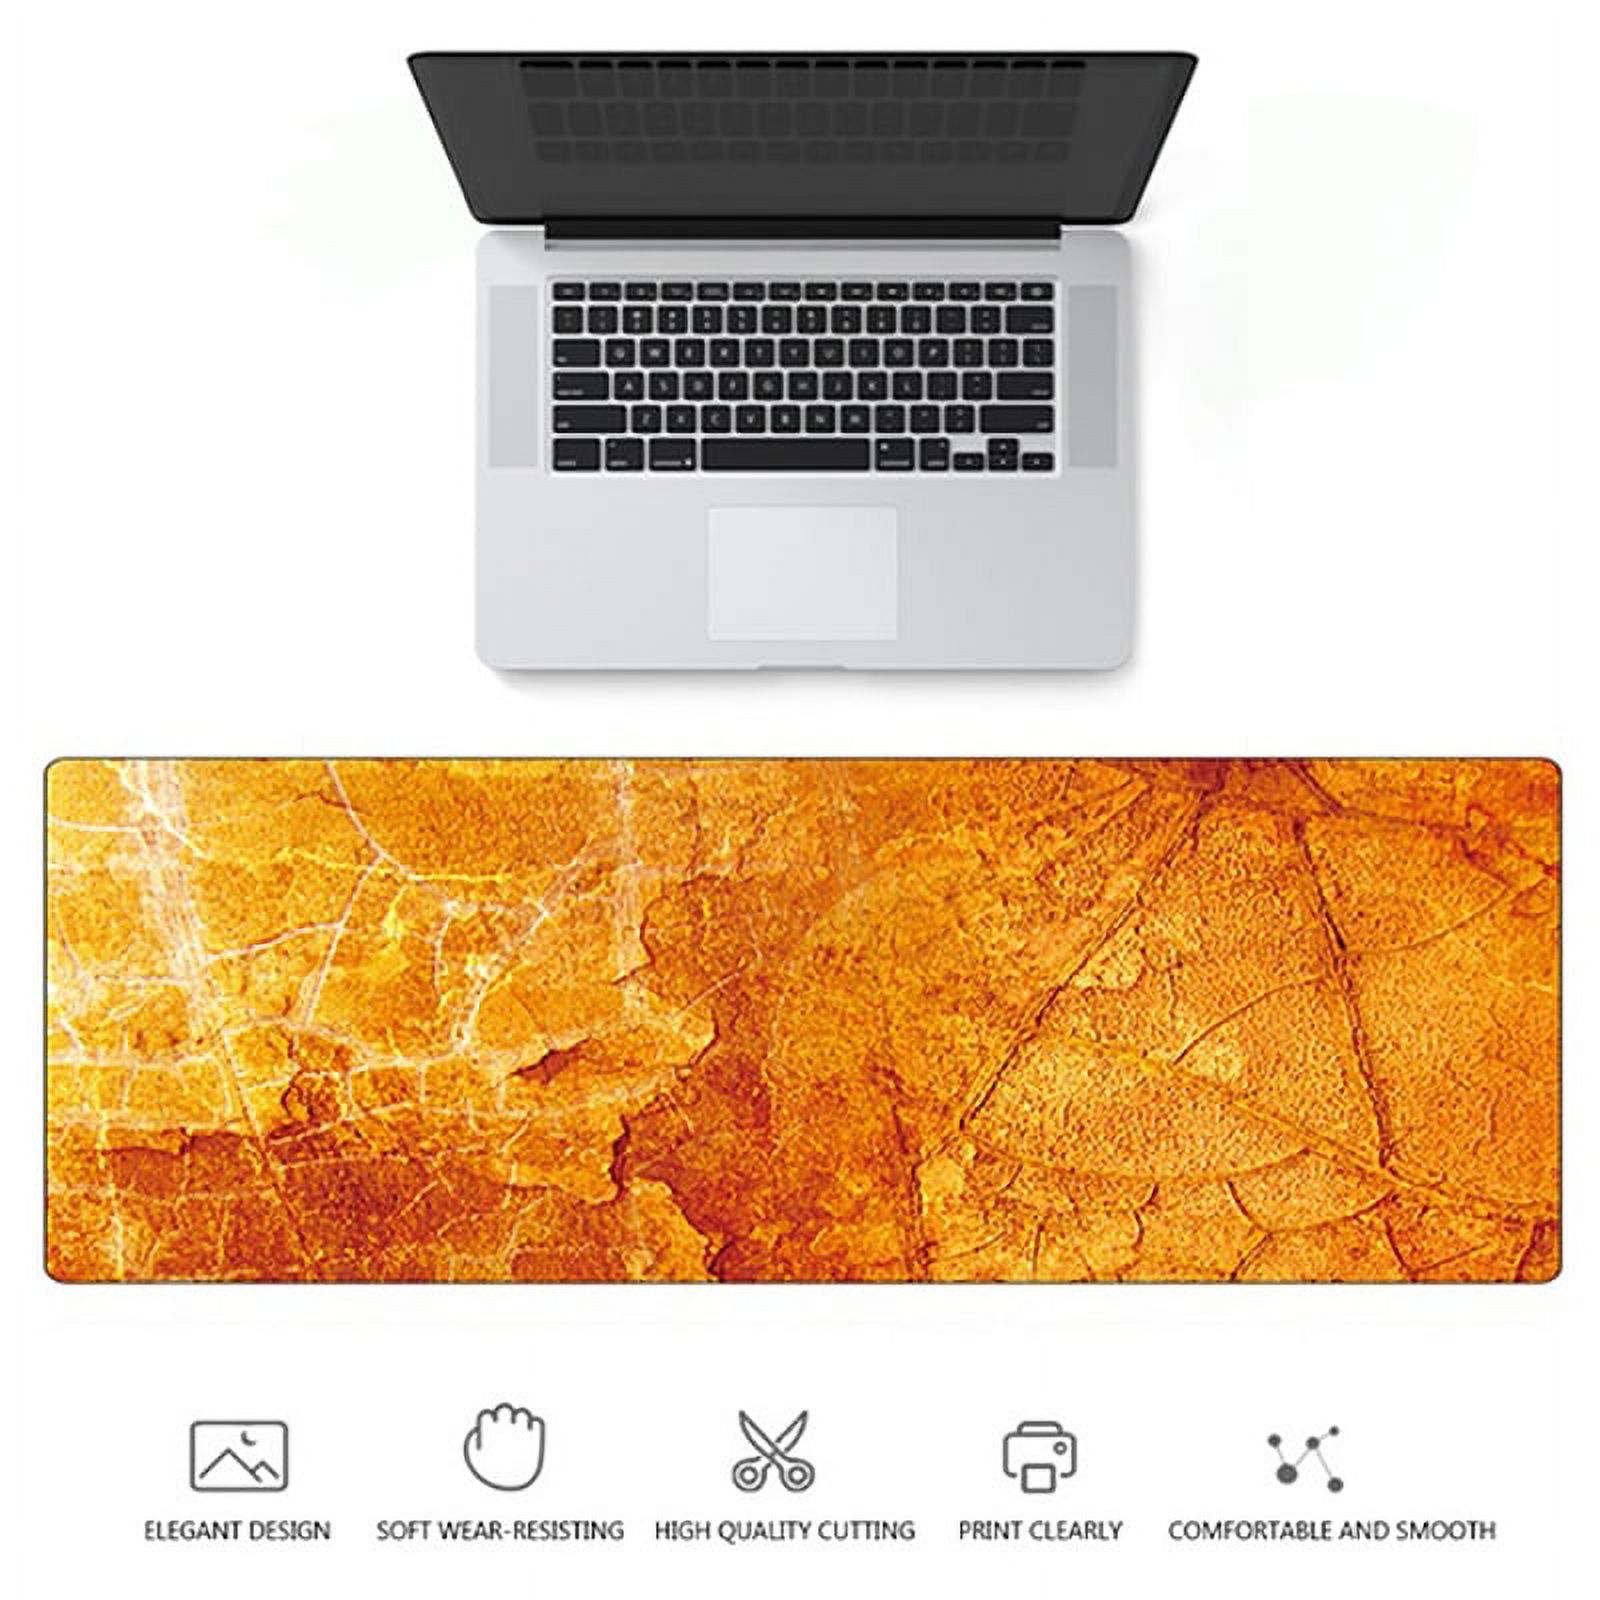 Extended Gaming Mouse Pad, Table Rubber Marble Grain Computer Desk Mat Laptop Cushion Keyboard Mouse Pad for Work and Game - image 2 of 5